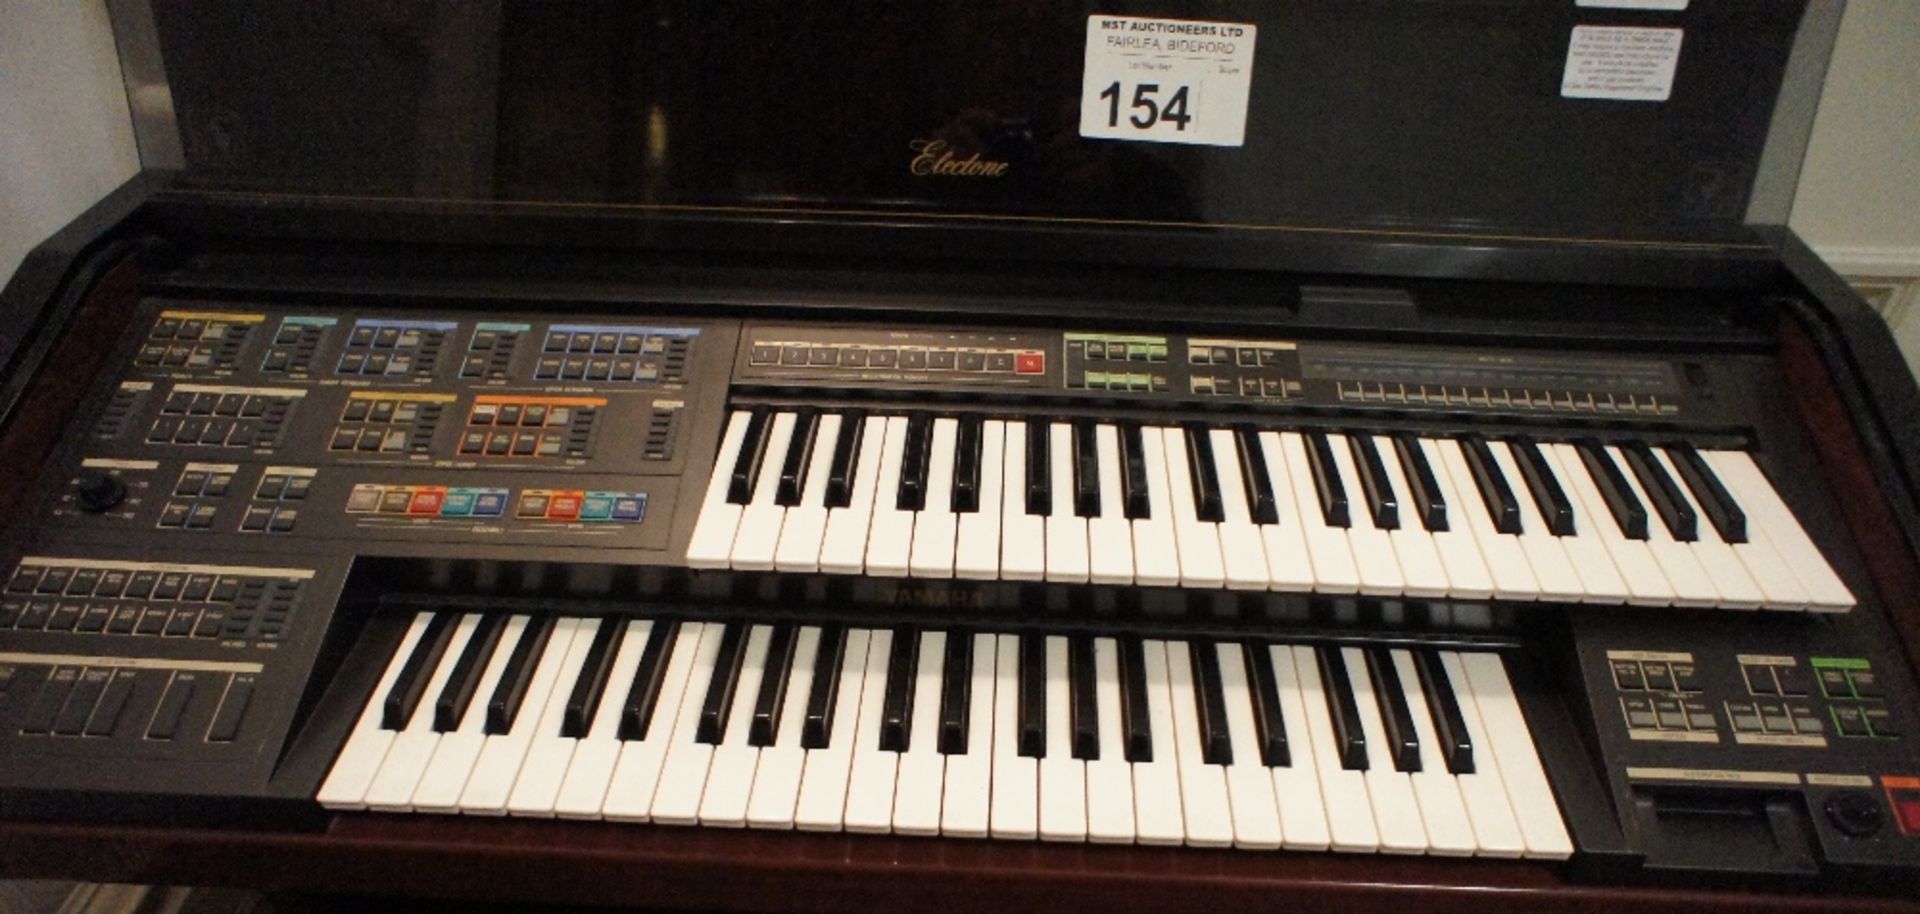 1 YAMAHA Electrone double keyboard electric piano with foot pedals and many electronic buttons, plus - Image 5 of 5